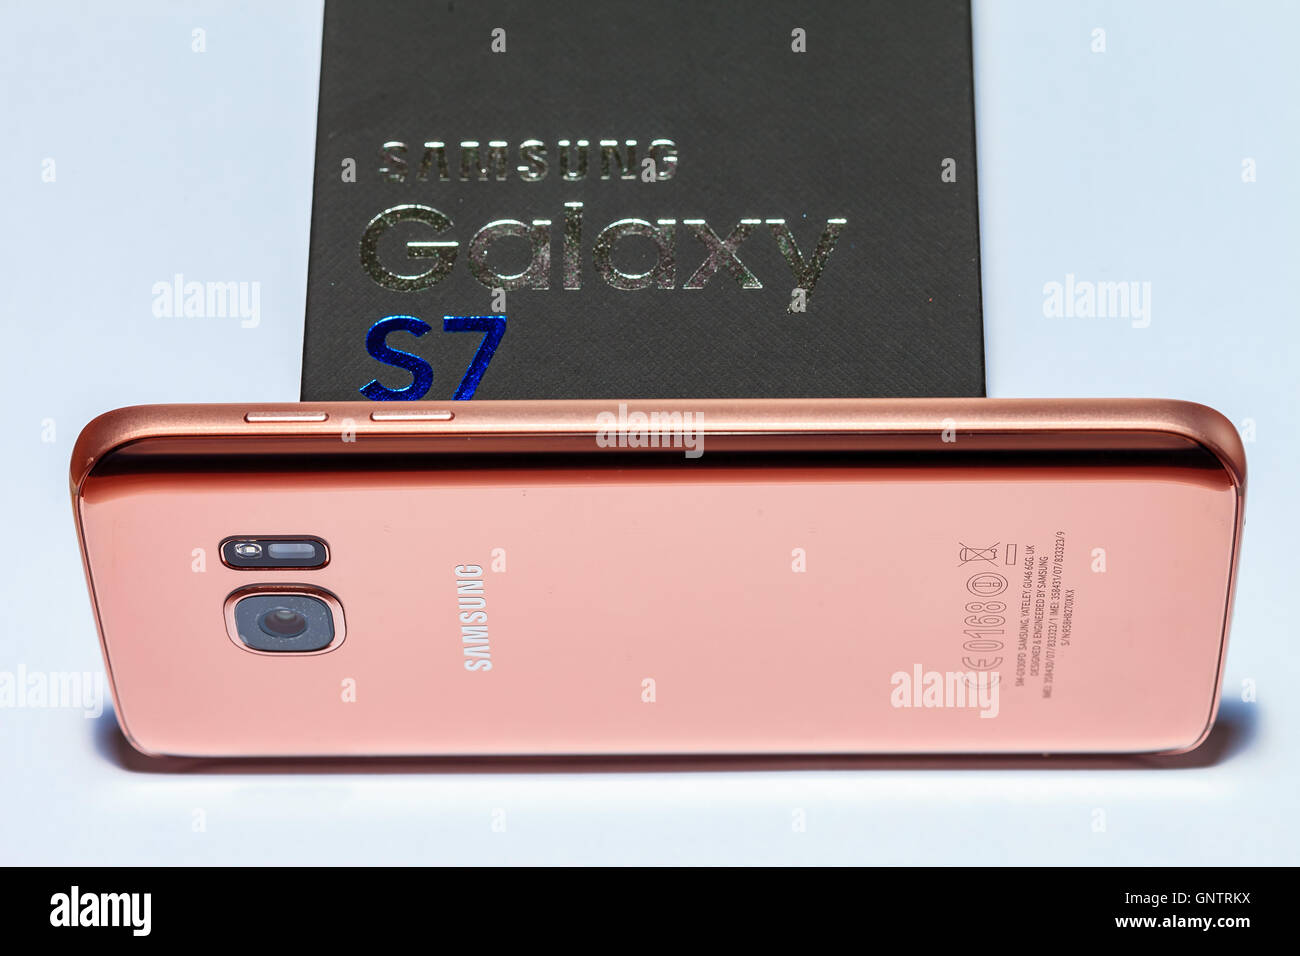 Rose gold colored Samsung Galaxy S7 mobile phone Stock Photo - Alamy